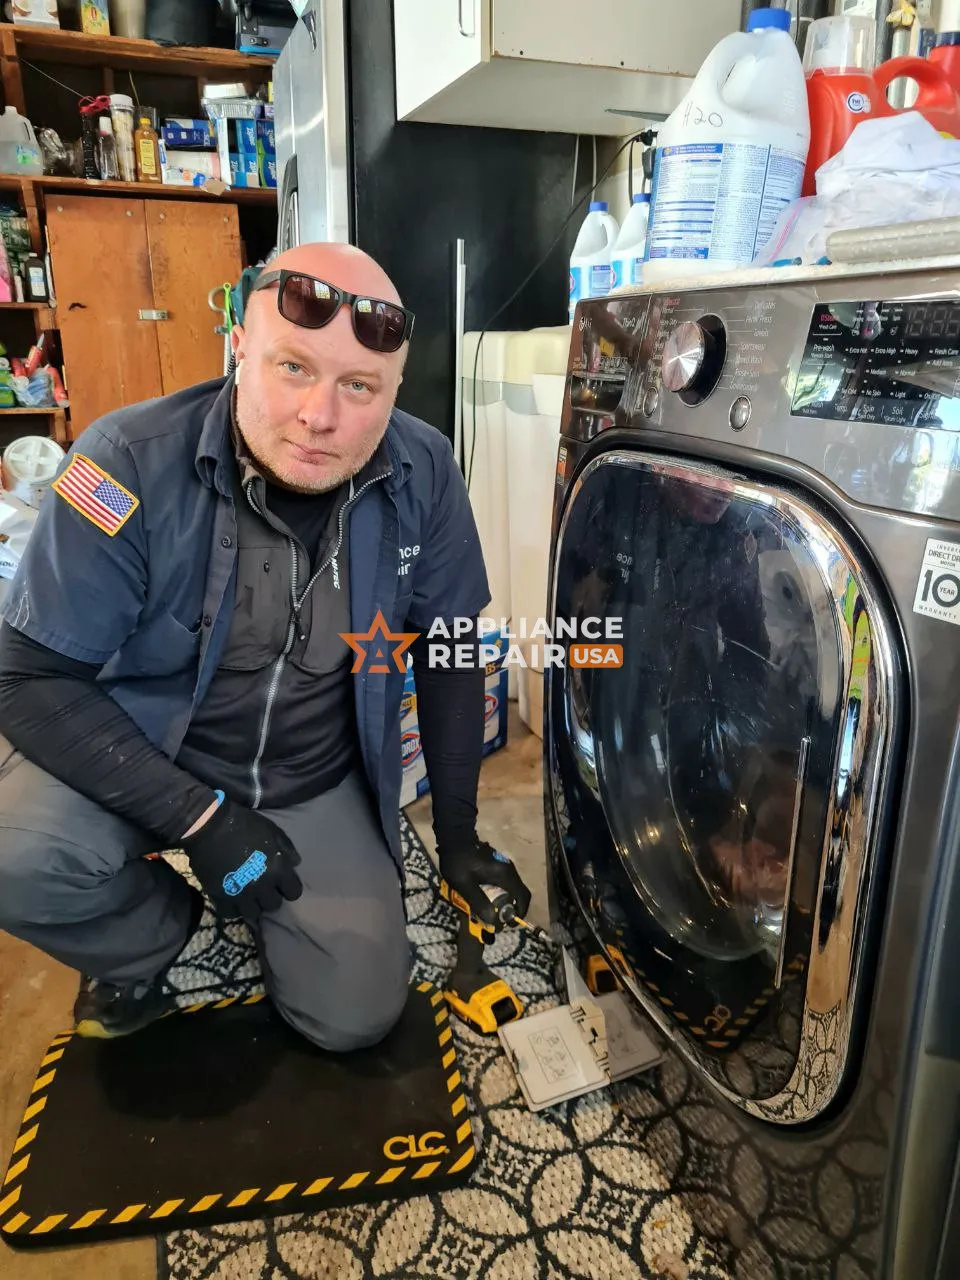 Expert Maintenance Tips and Solutions for Common Washer & Dryer Problems